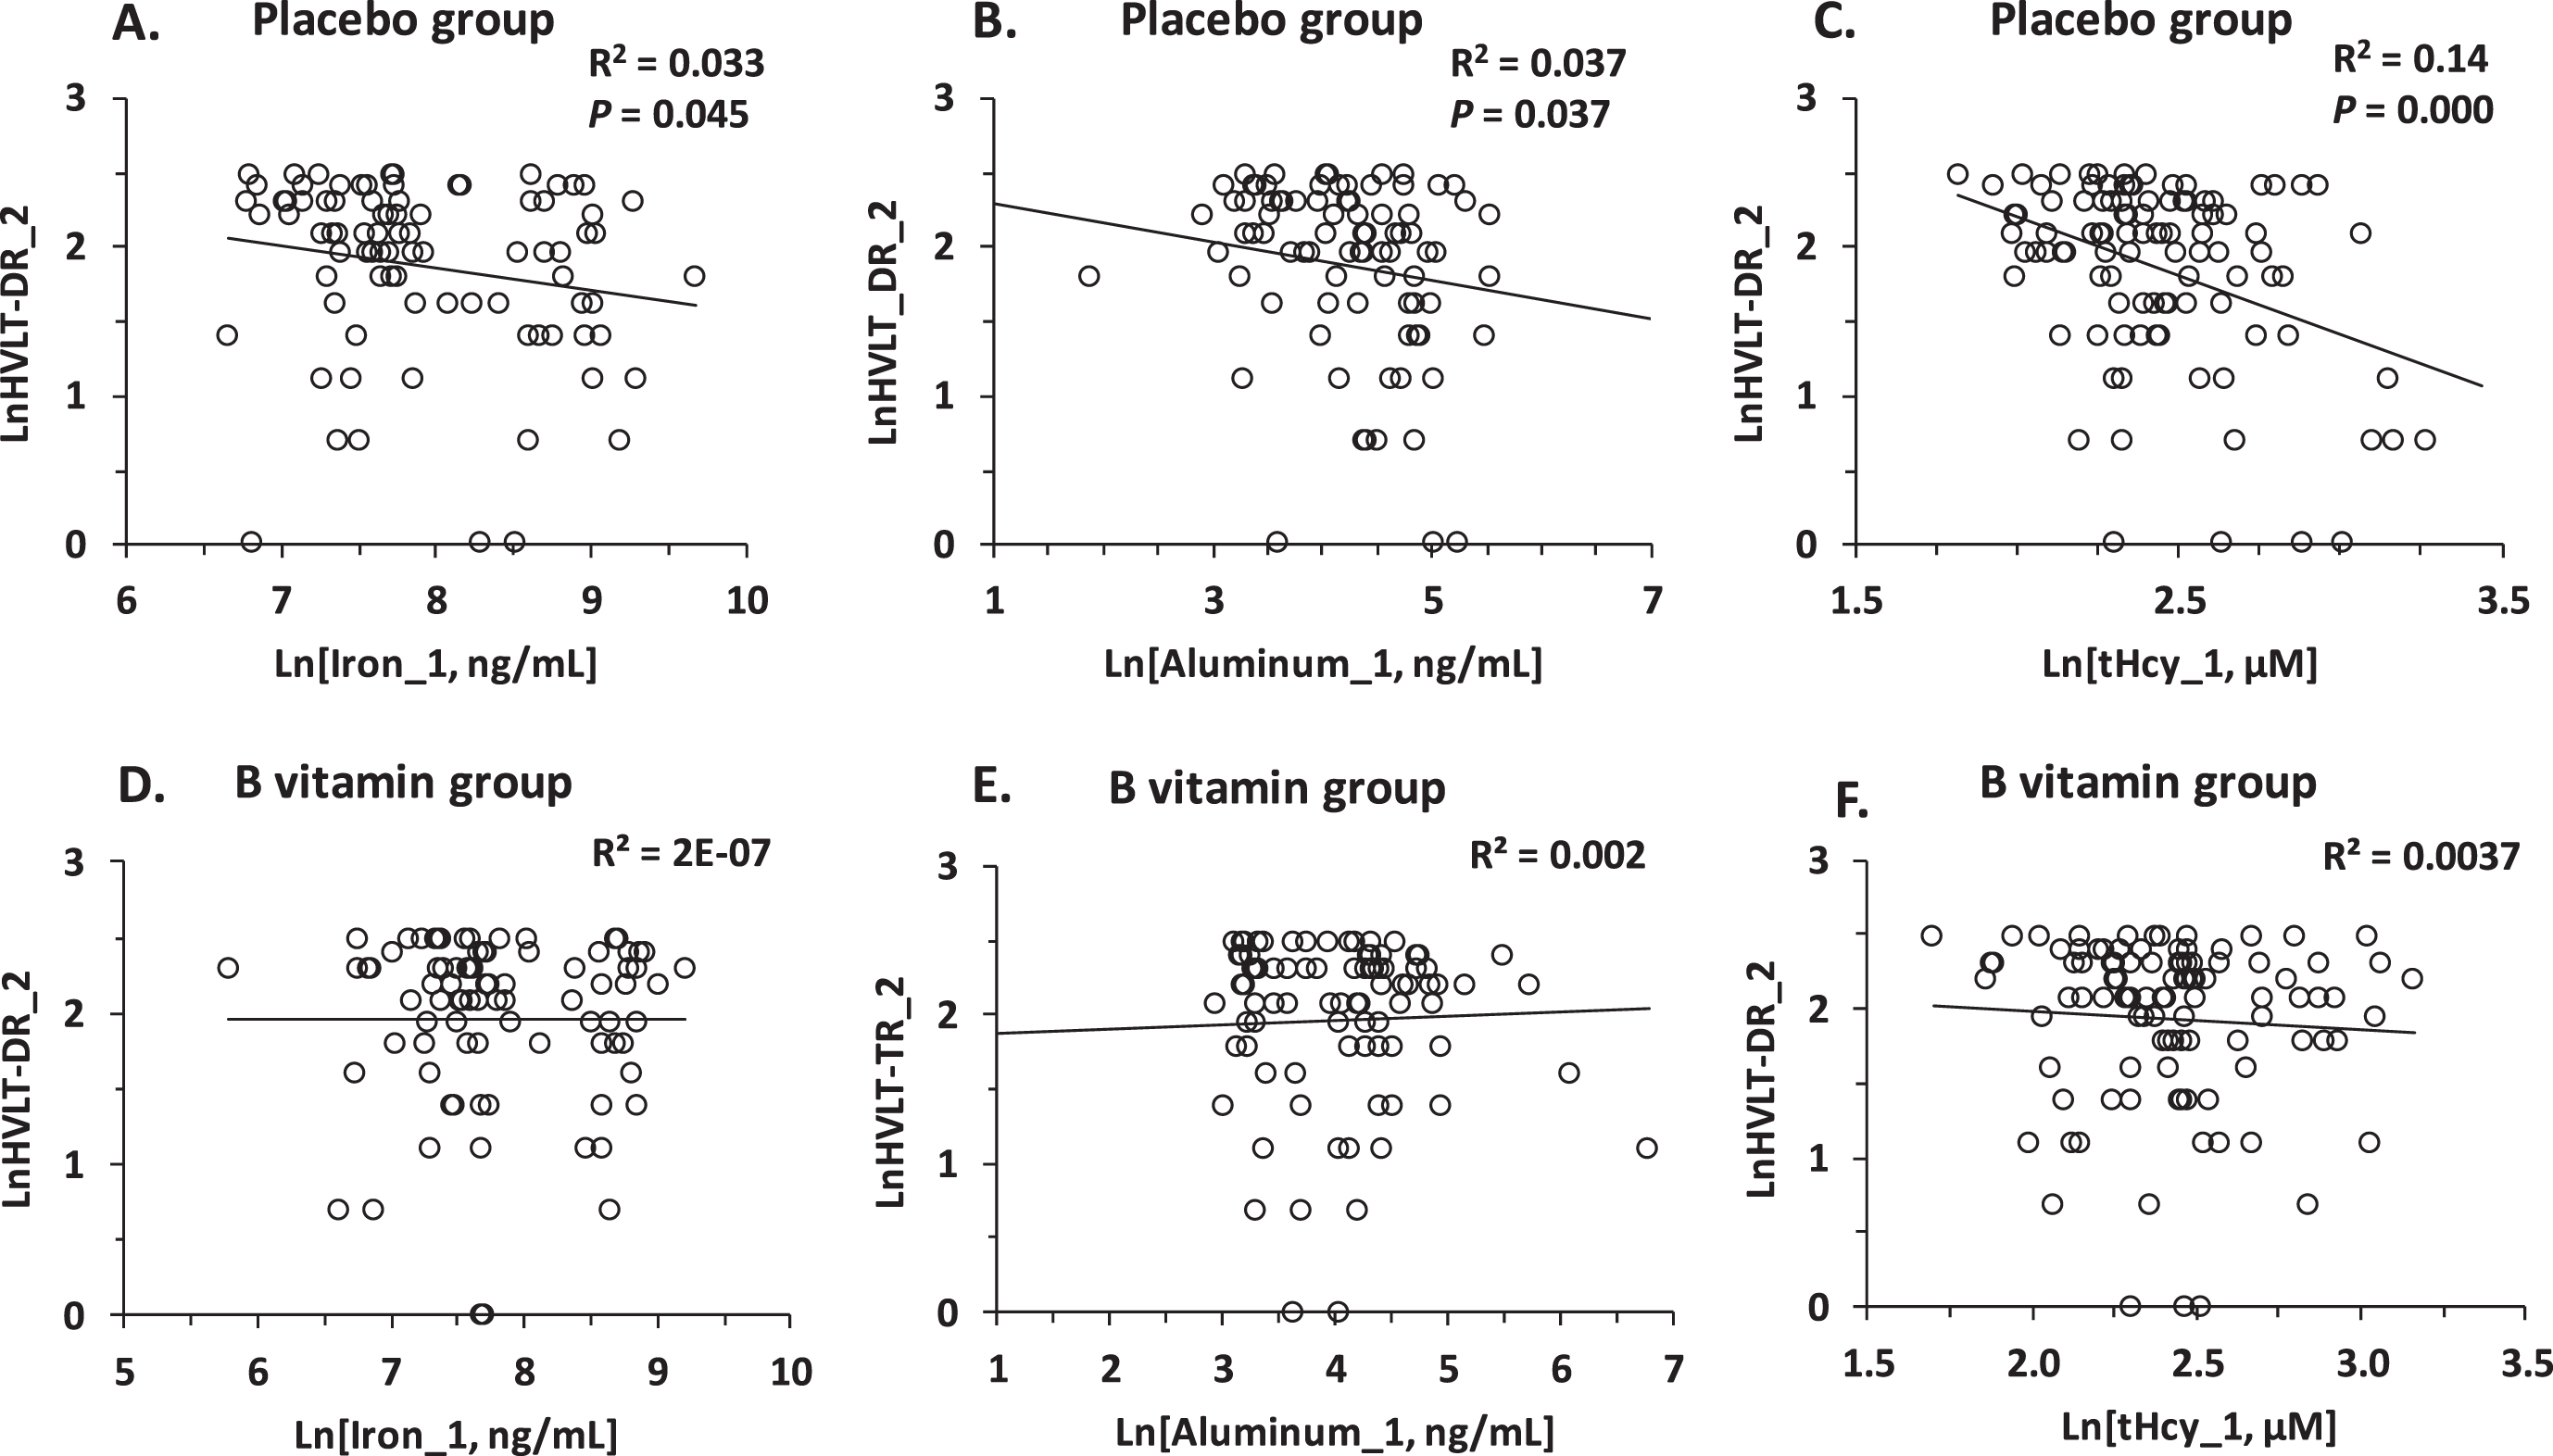 Pearson correlations between verbal episodic memory at the end of study (HVLT-DR_2) and baseline concentrations of serum iron (Fe_1) (A, D), aluminum (Al_1) (B, E), and tHcy (C, F) in MCI individuals. A, B, C) Placebo group; D, E, F) B vitamin group.